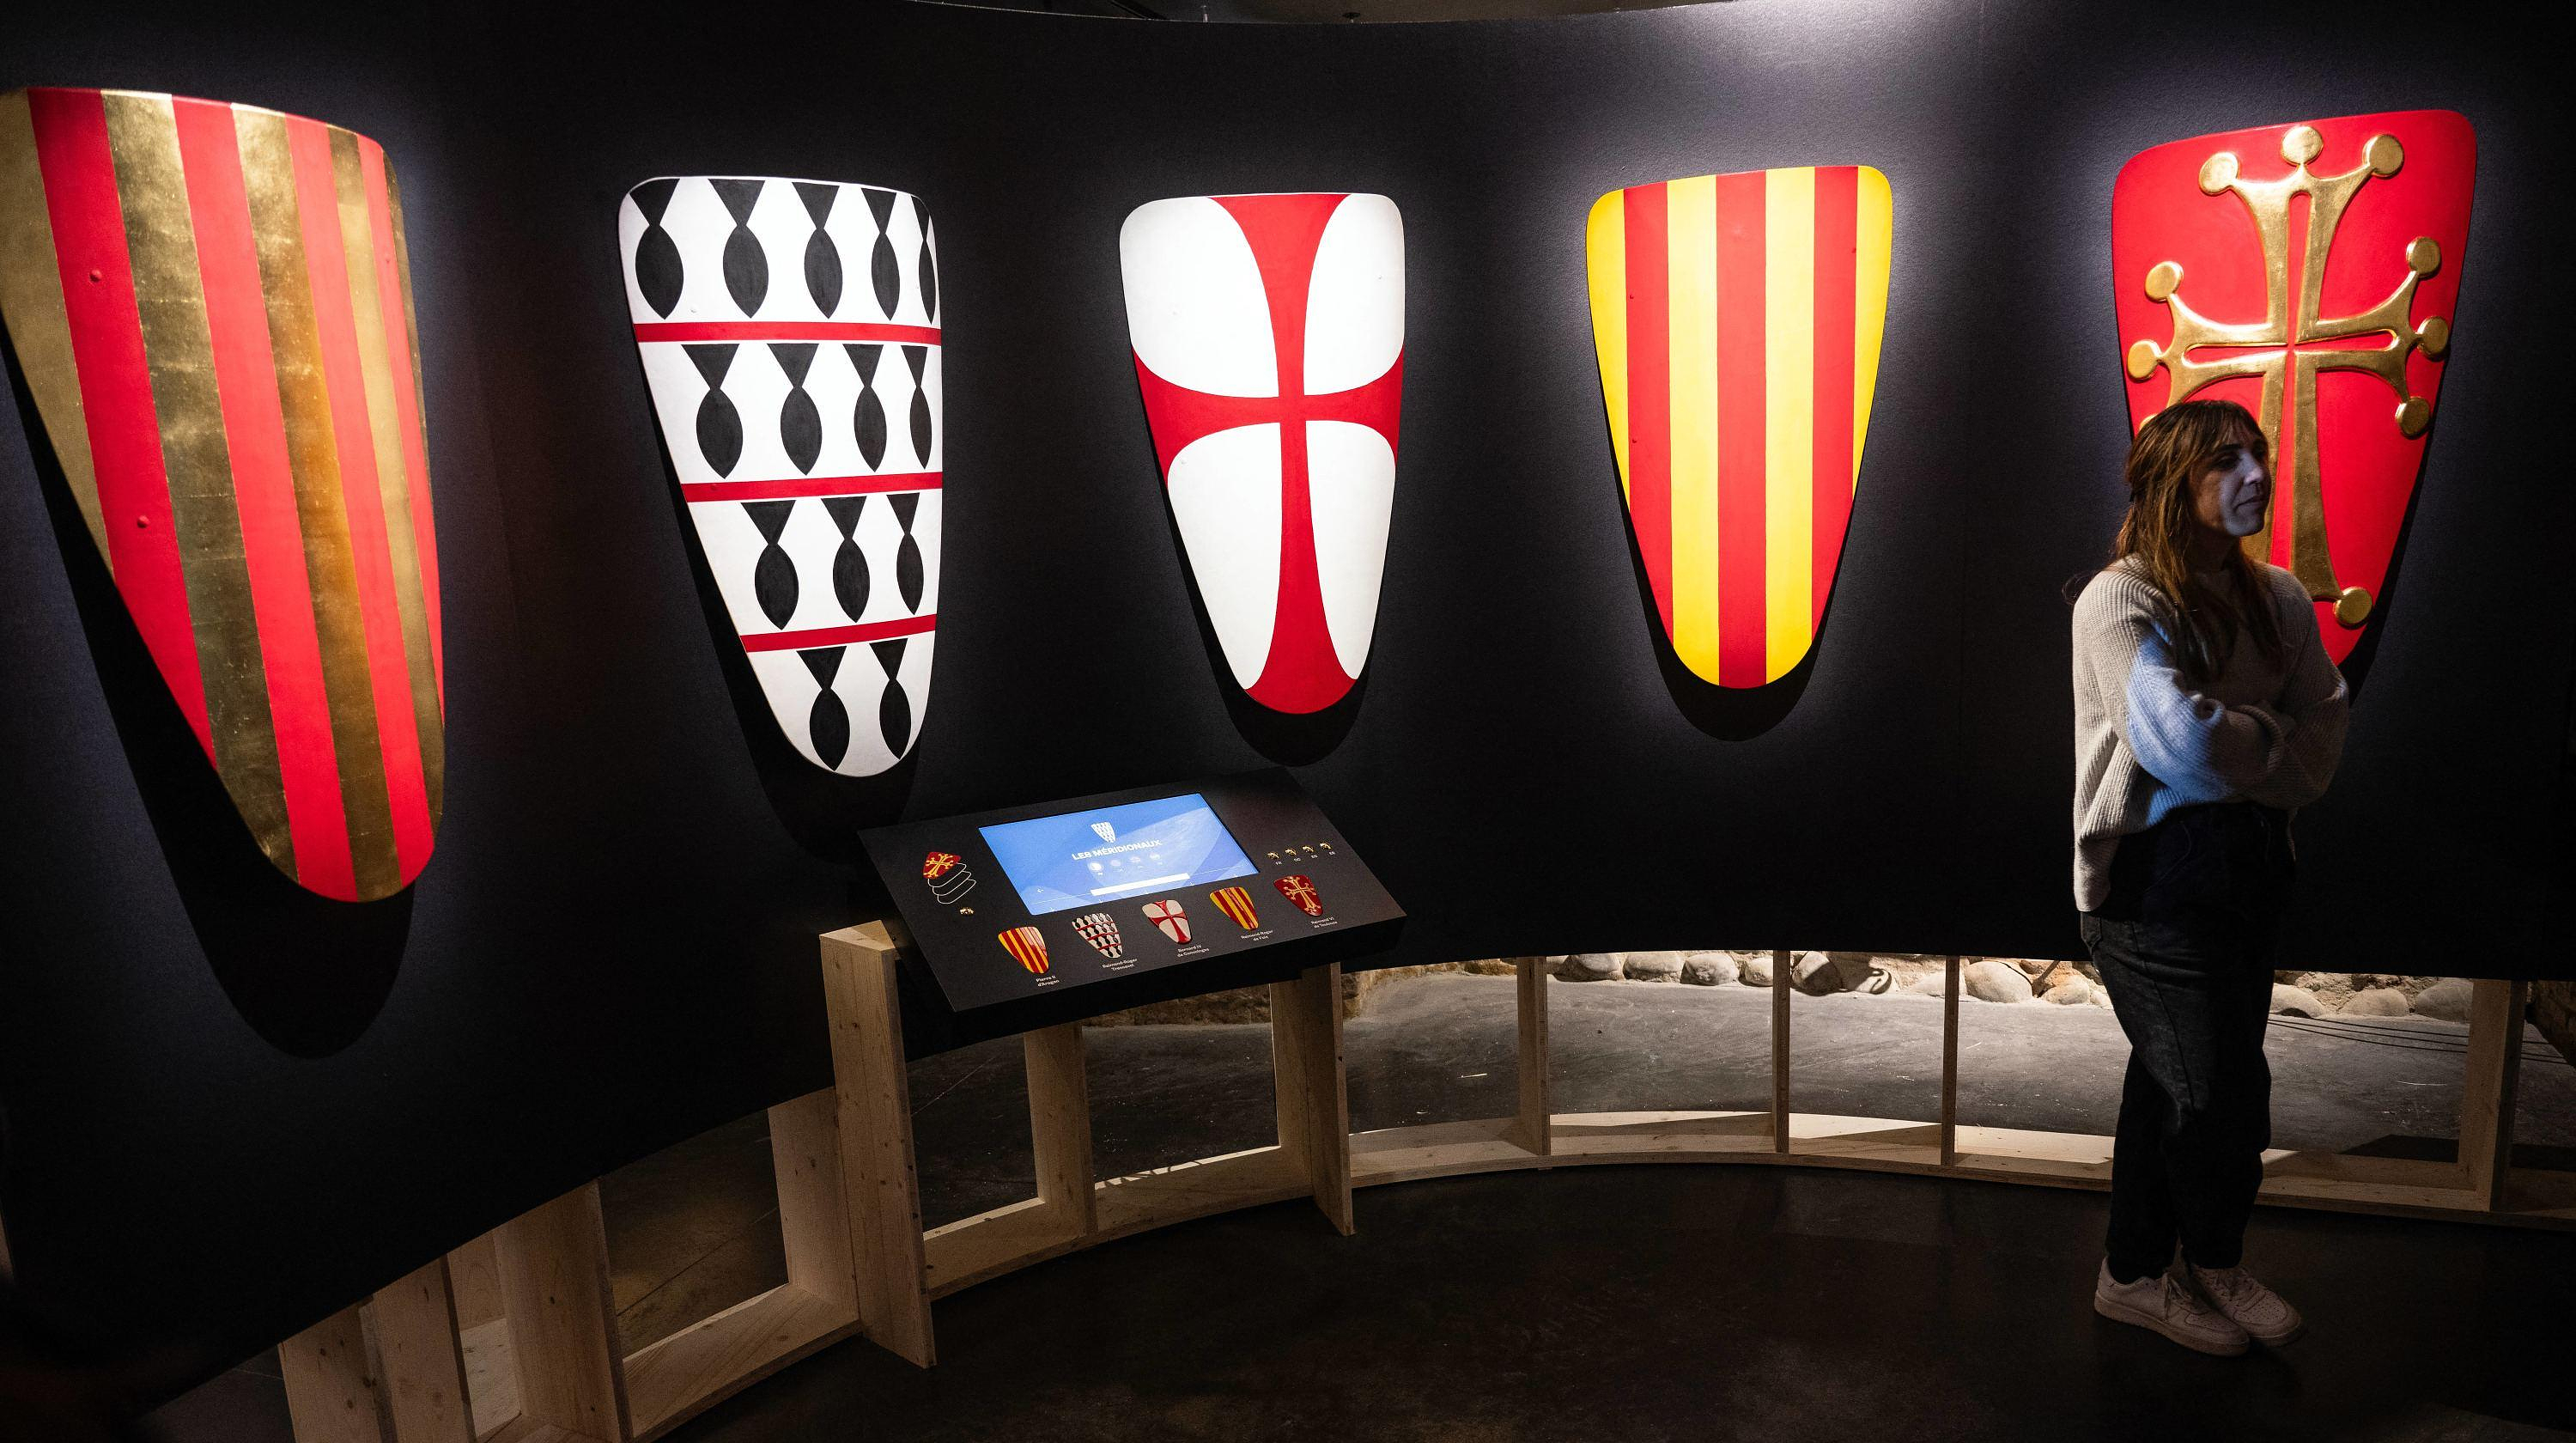 The complex history of the Cathars is on display in Toulouse